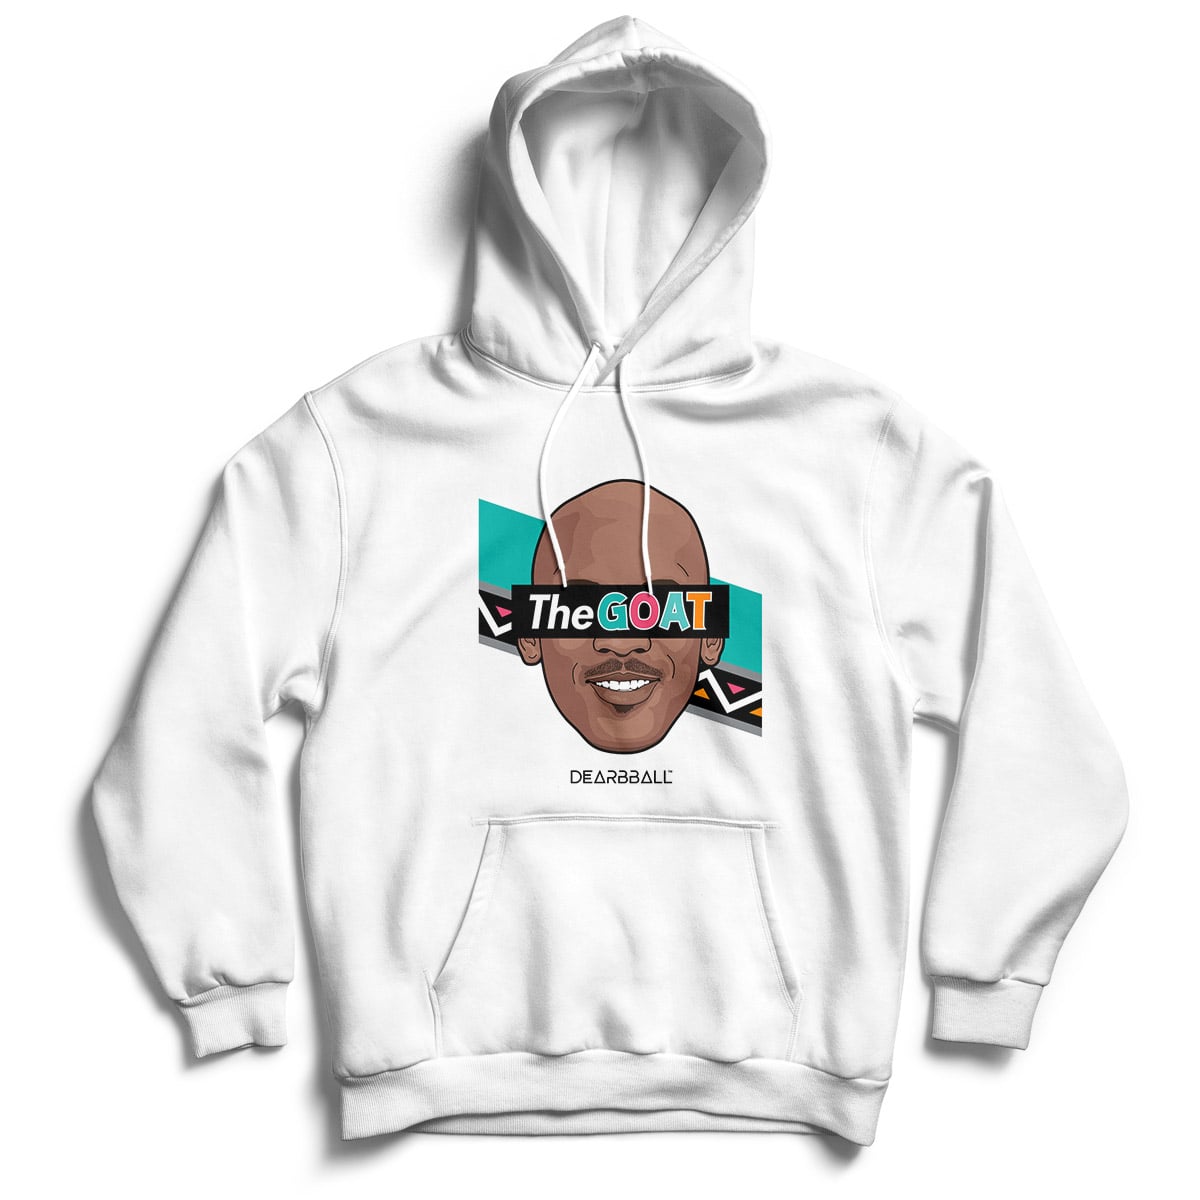 DearBBall Hooded Sweatshirt - TheGOAT 1996 All Star Game Edition